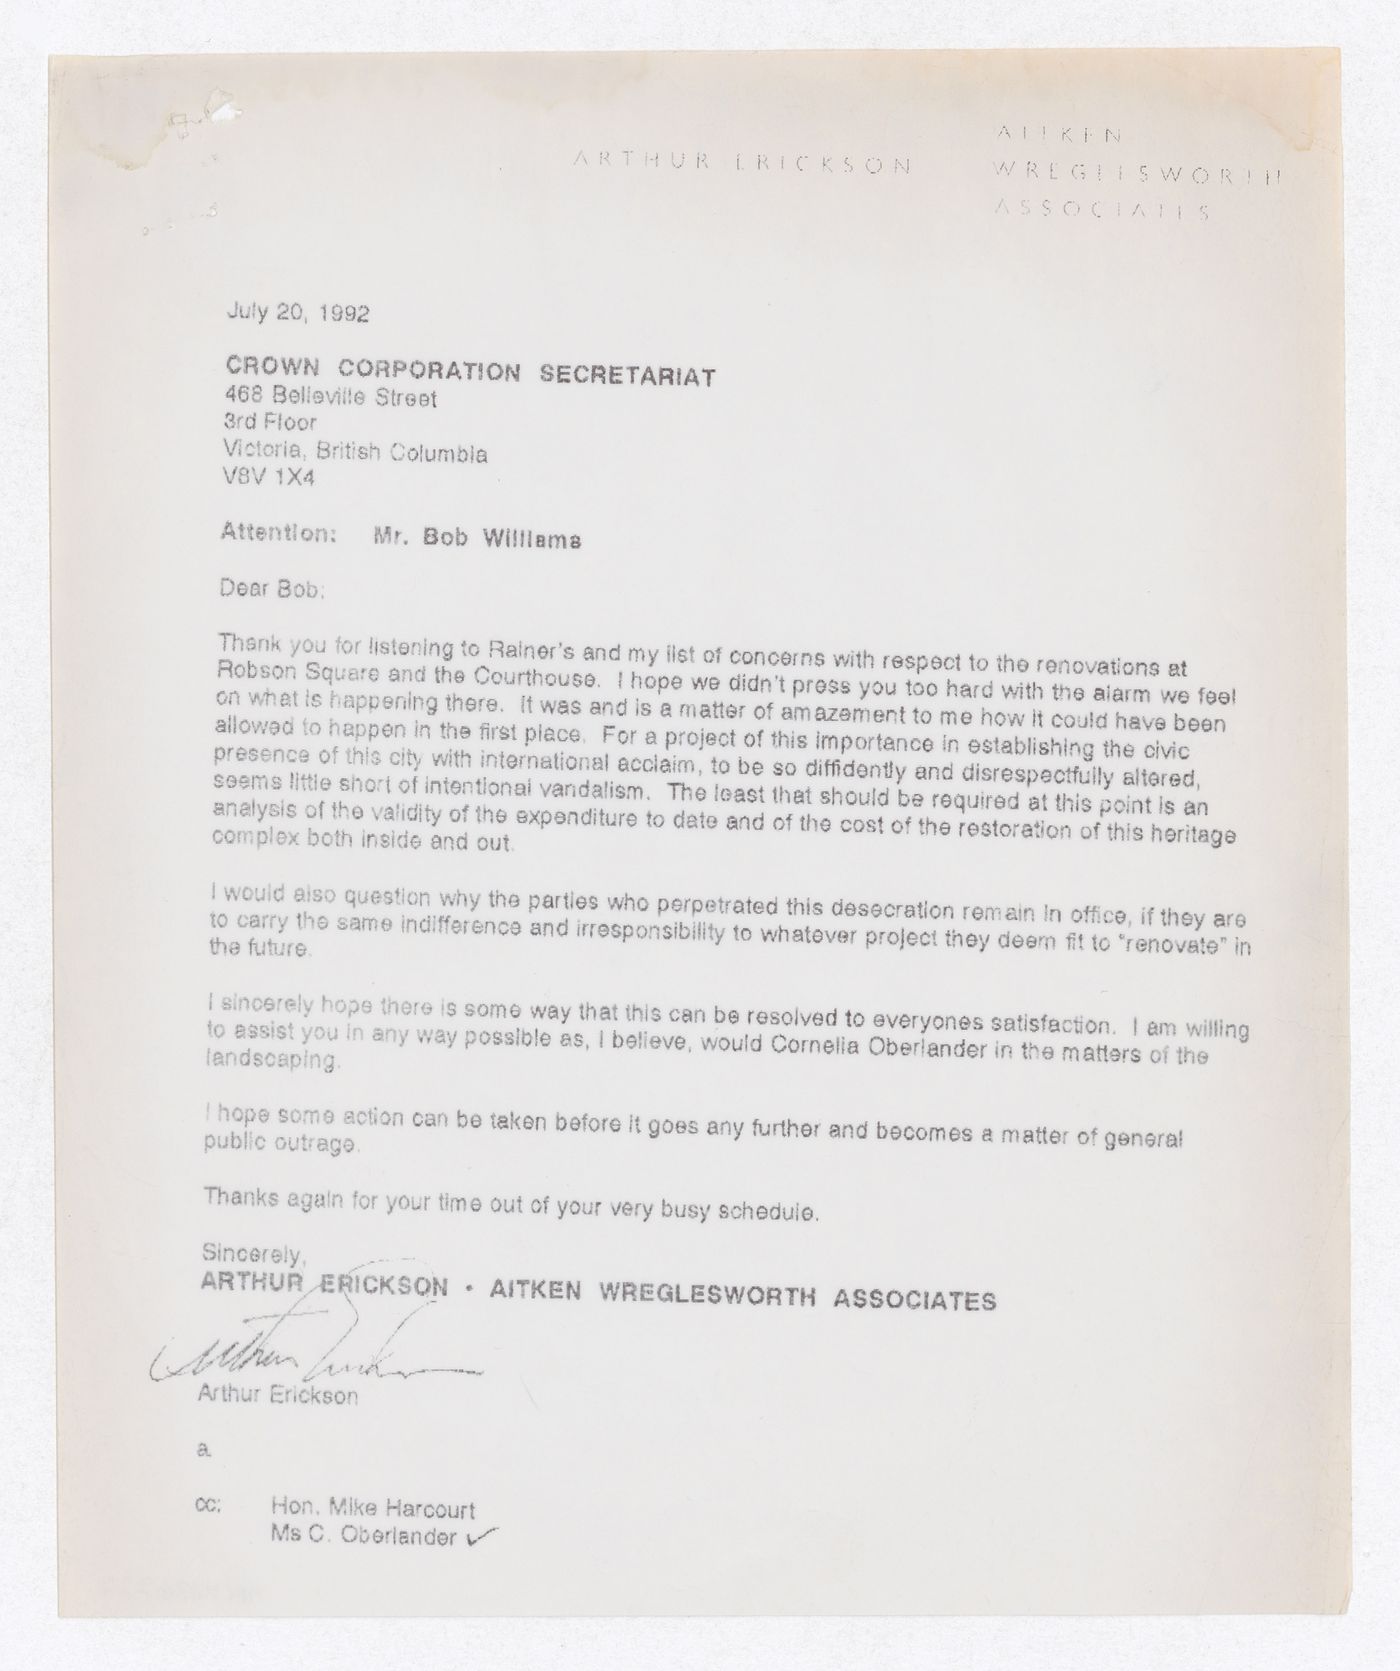 Letter from Arthur Erickson to Bob Williams of the Crown Corporation Secretariat about renovations to Robson Square and the Courthouse